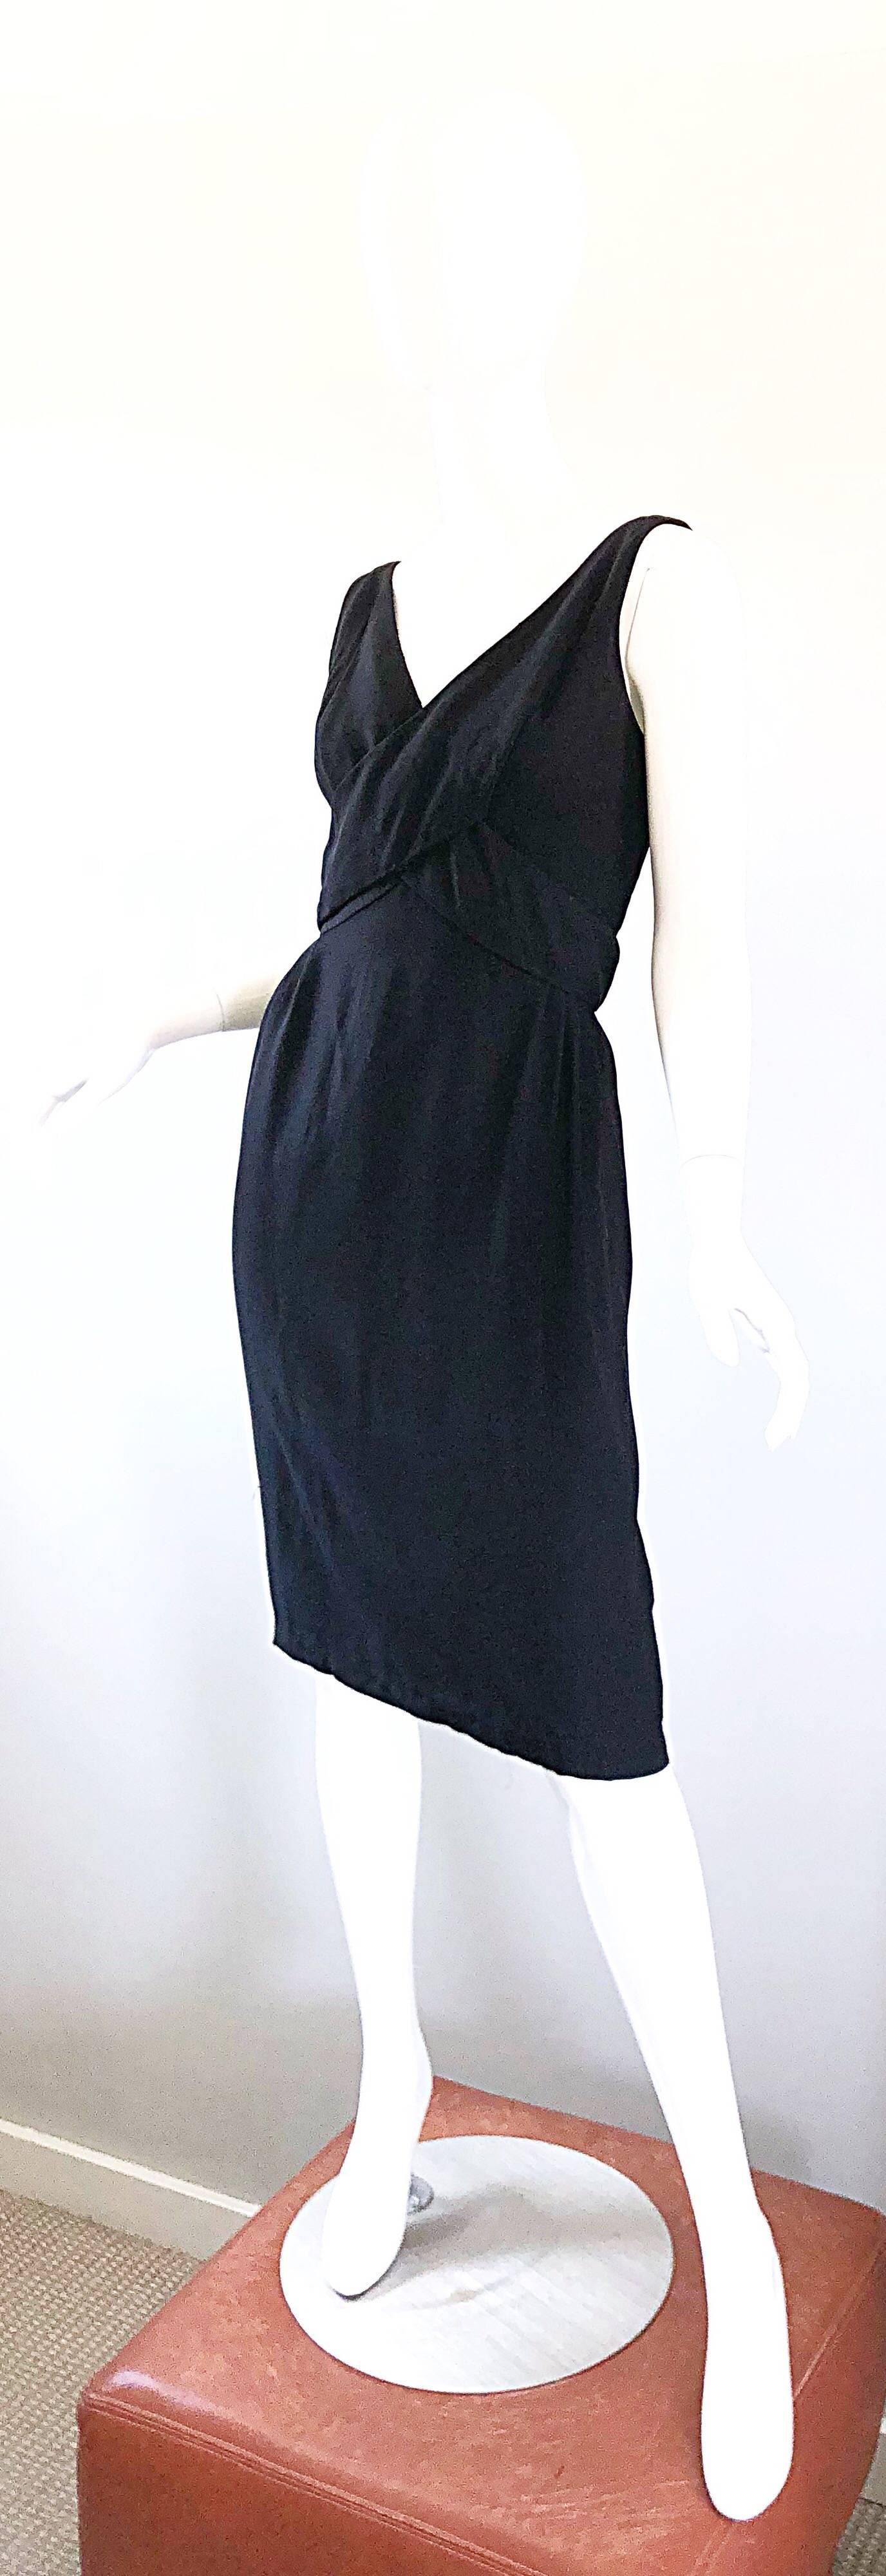 1950s Chic Crepe Sleeveless Perfect Vintage 50s Little Black Sheath Dress For Sale 6